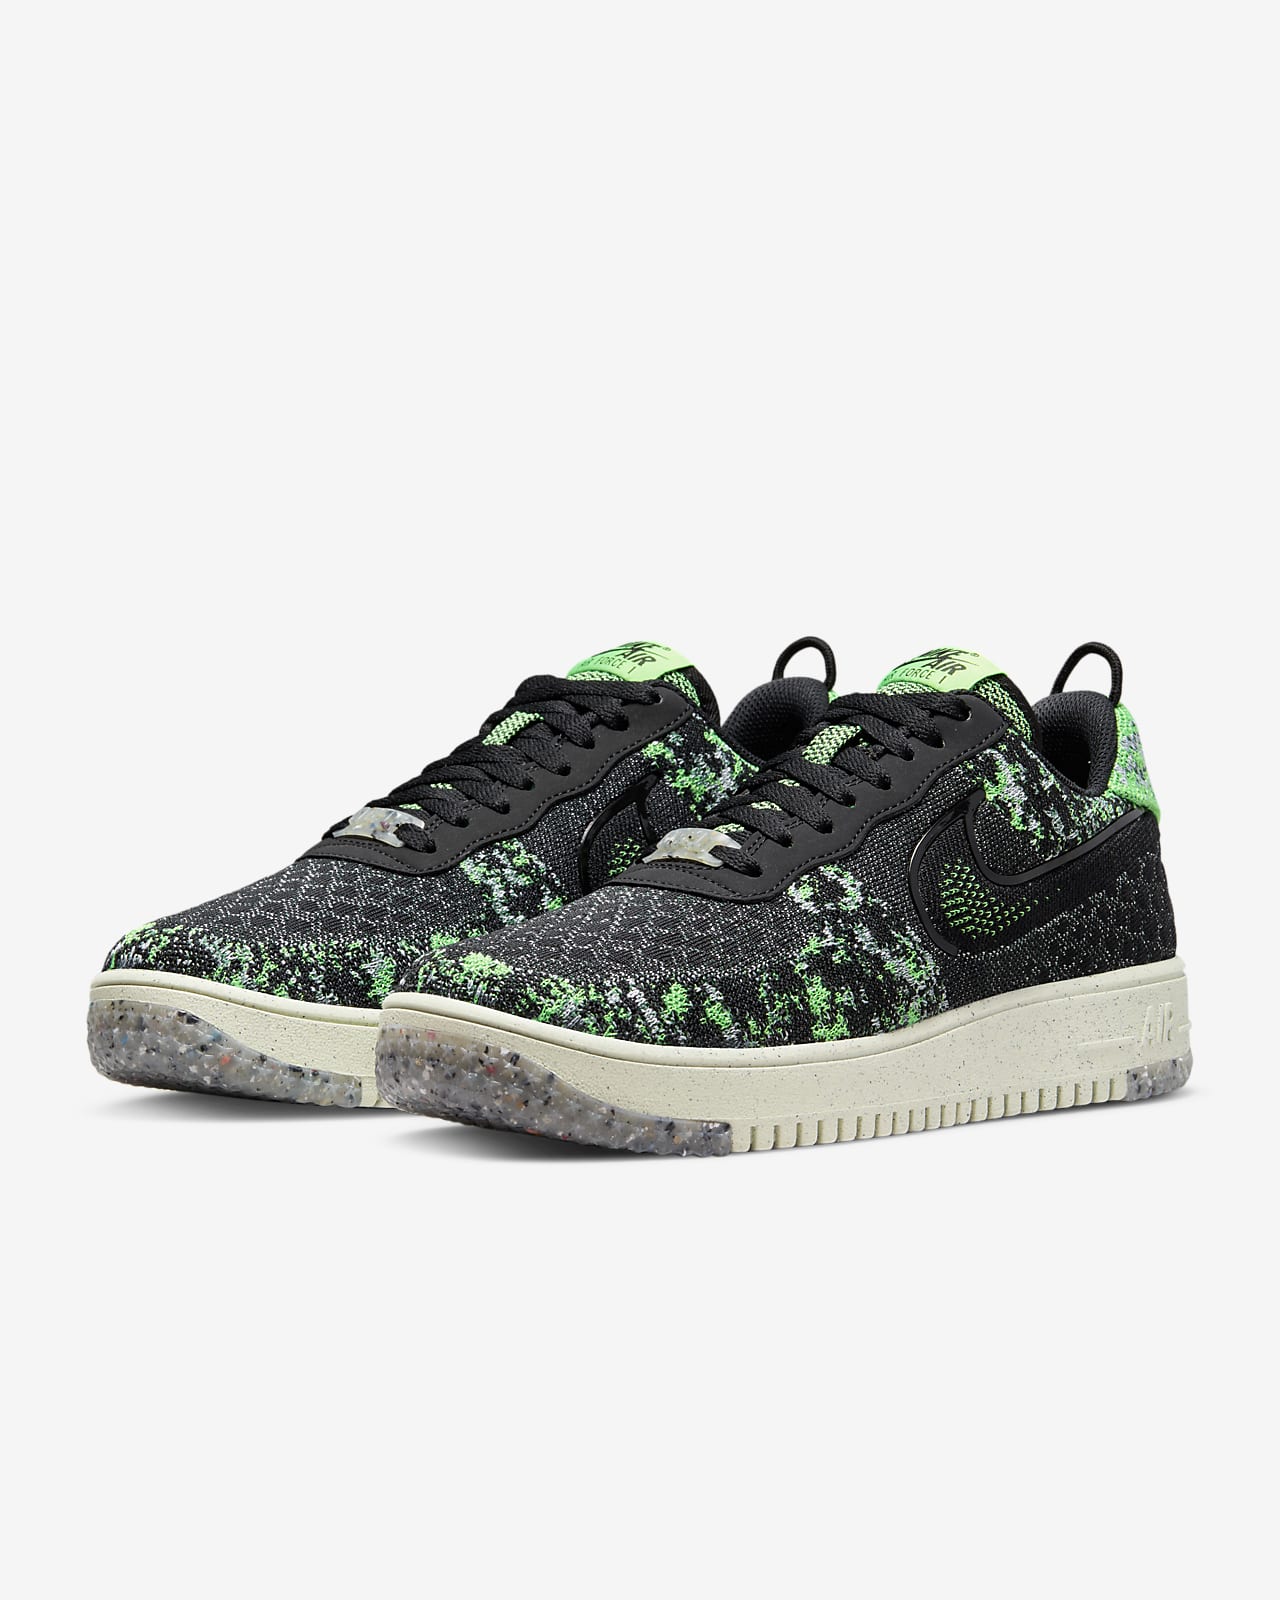 Mens Air Force 1 Crater Flyknit Casual Shoes JD Sports Men Shoes Flat Shoes Casual Shoes 